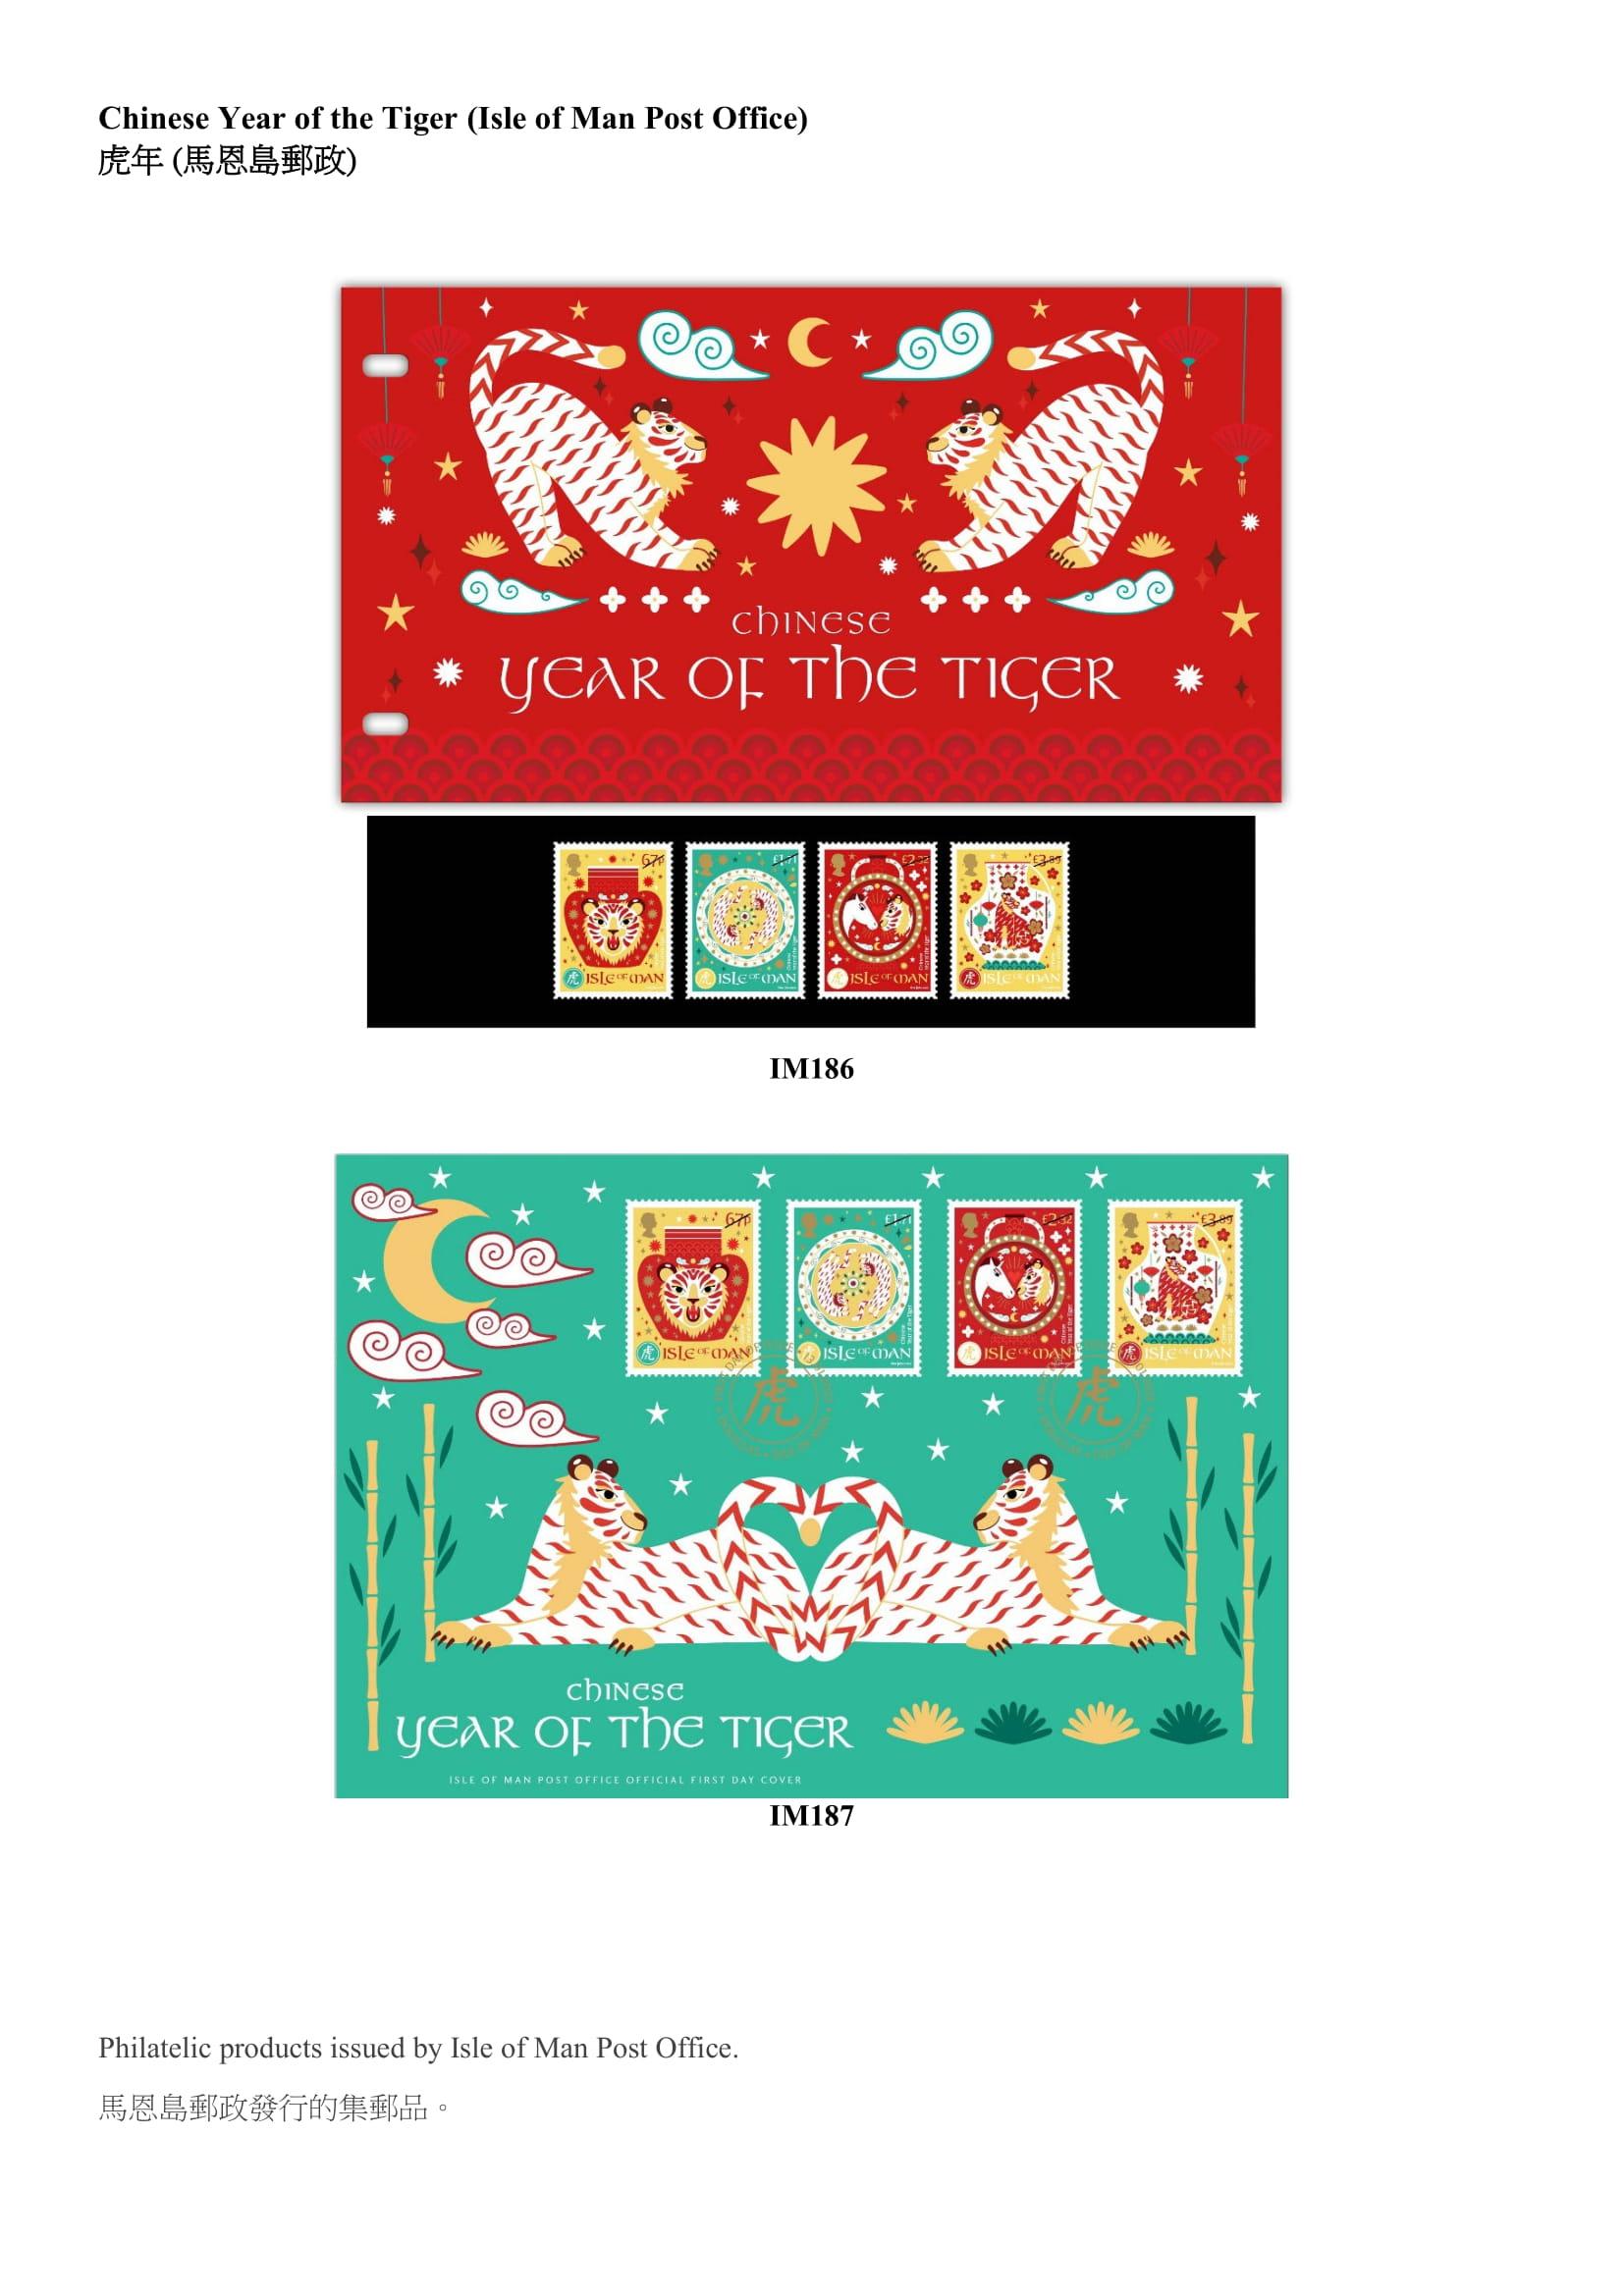 Hongkong Post announced today (March 4) that selected philatelic products issued by China Post, the Macao Post and Telecommunications Bureau and the overseas postal administrations of Australia, Isle of Man, Liechtenstein, New Zealand, the United Kingdom and the United Nations, will be put on sale at the Hongkong Post online shopping mall ShopThruPost starting from 8am on March 11. Picture shows philatelic products issued by Isle of Man Post Office.

